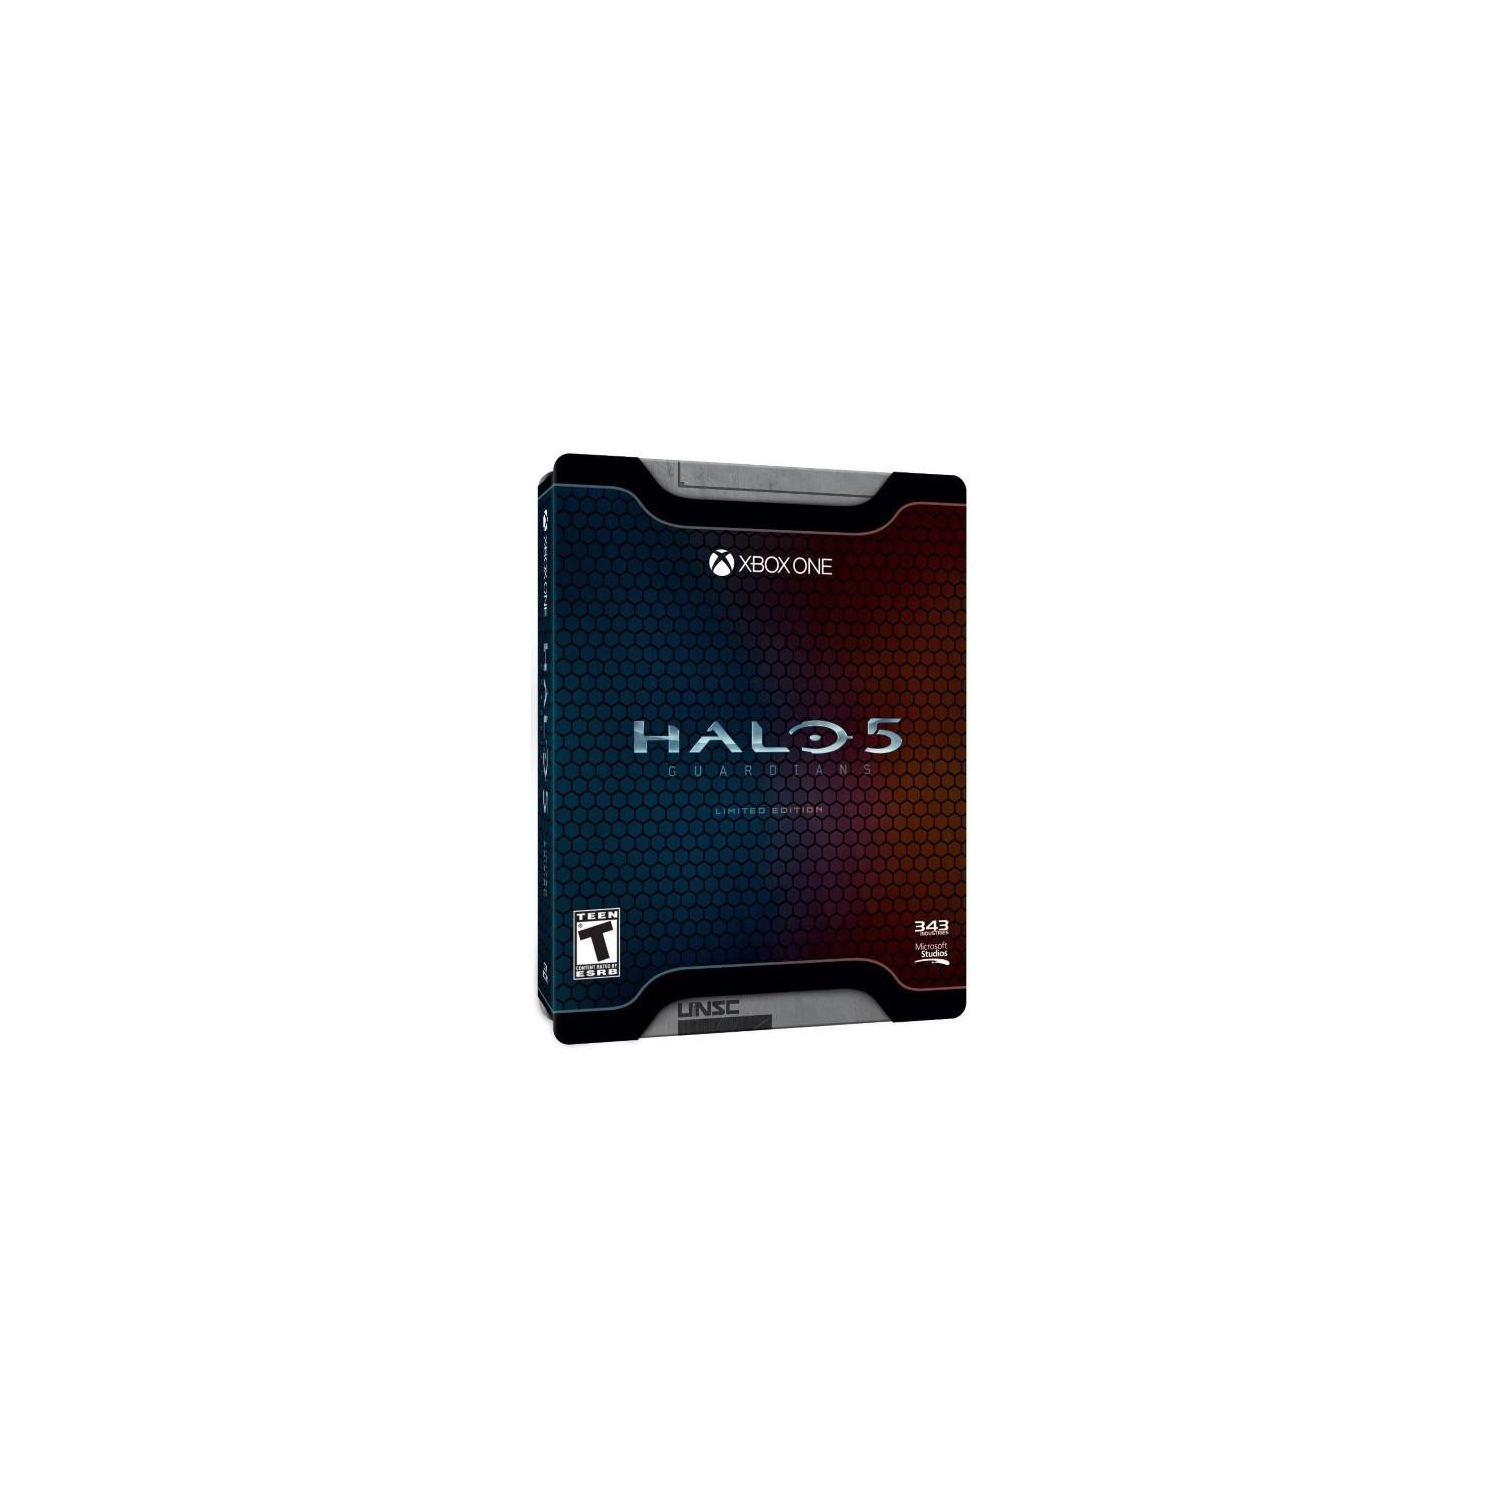 Halo 5 Guardians Limited Edition (Xbox One)